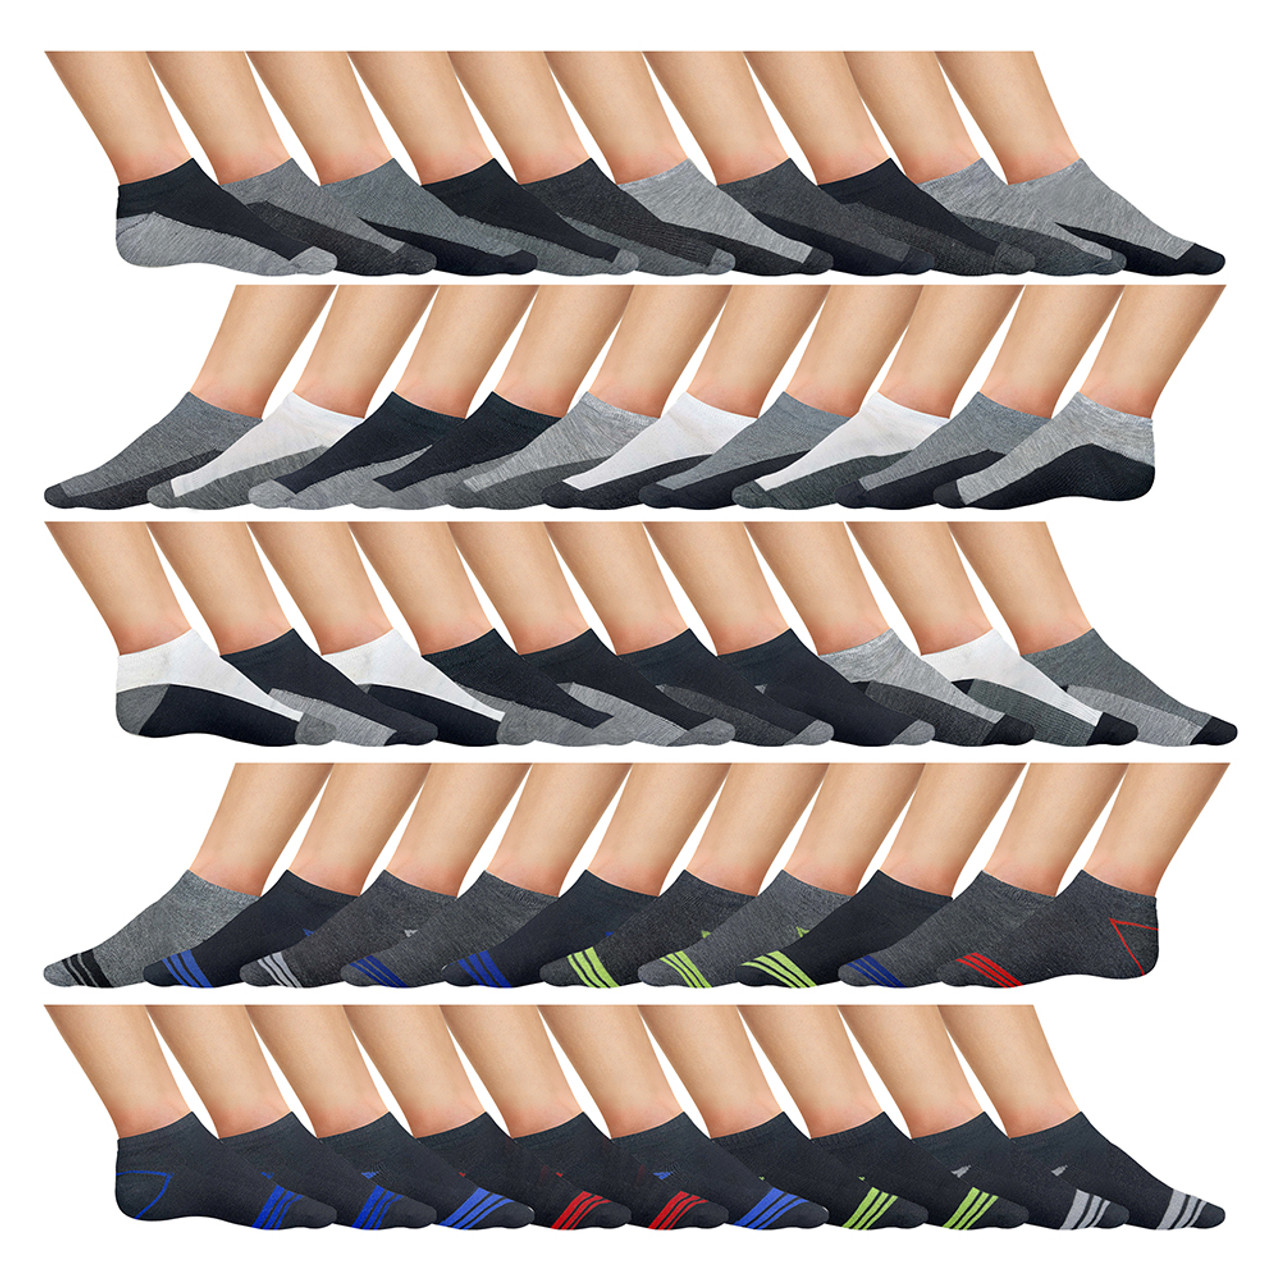 Men's Active Low-Cut Ankle Socks (20- or 50-Pairs) product image